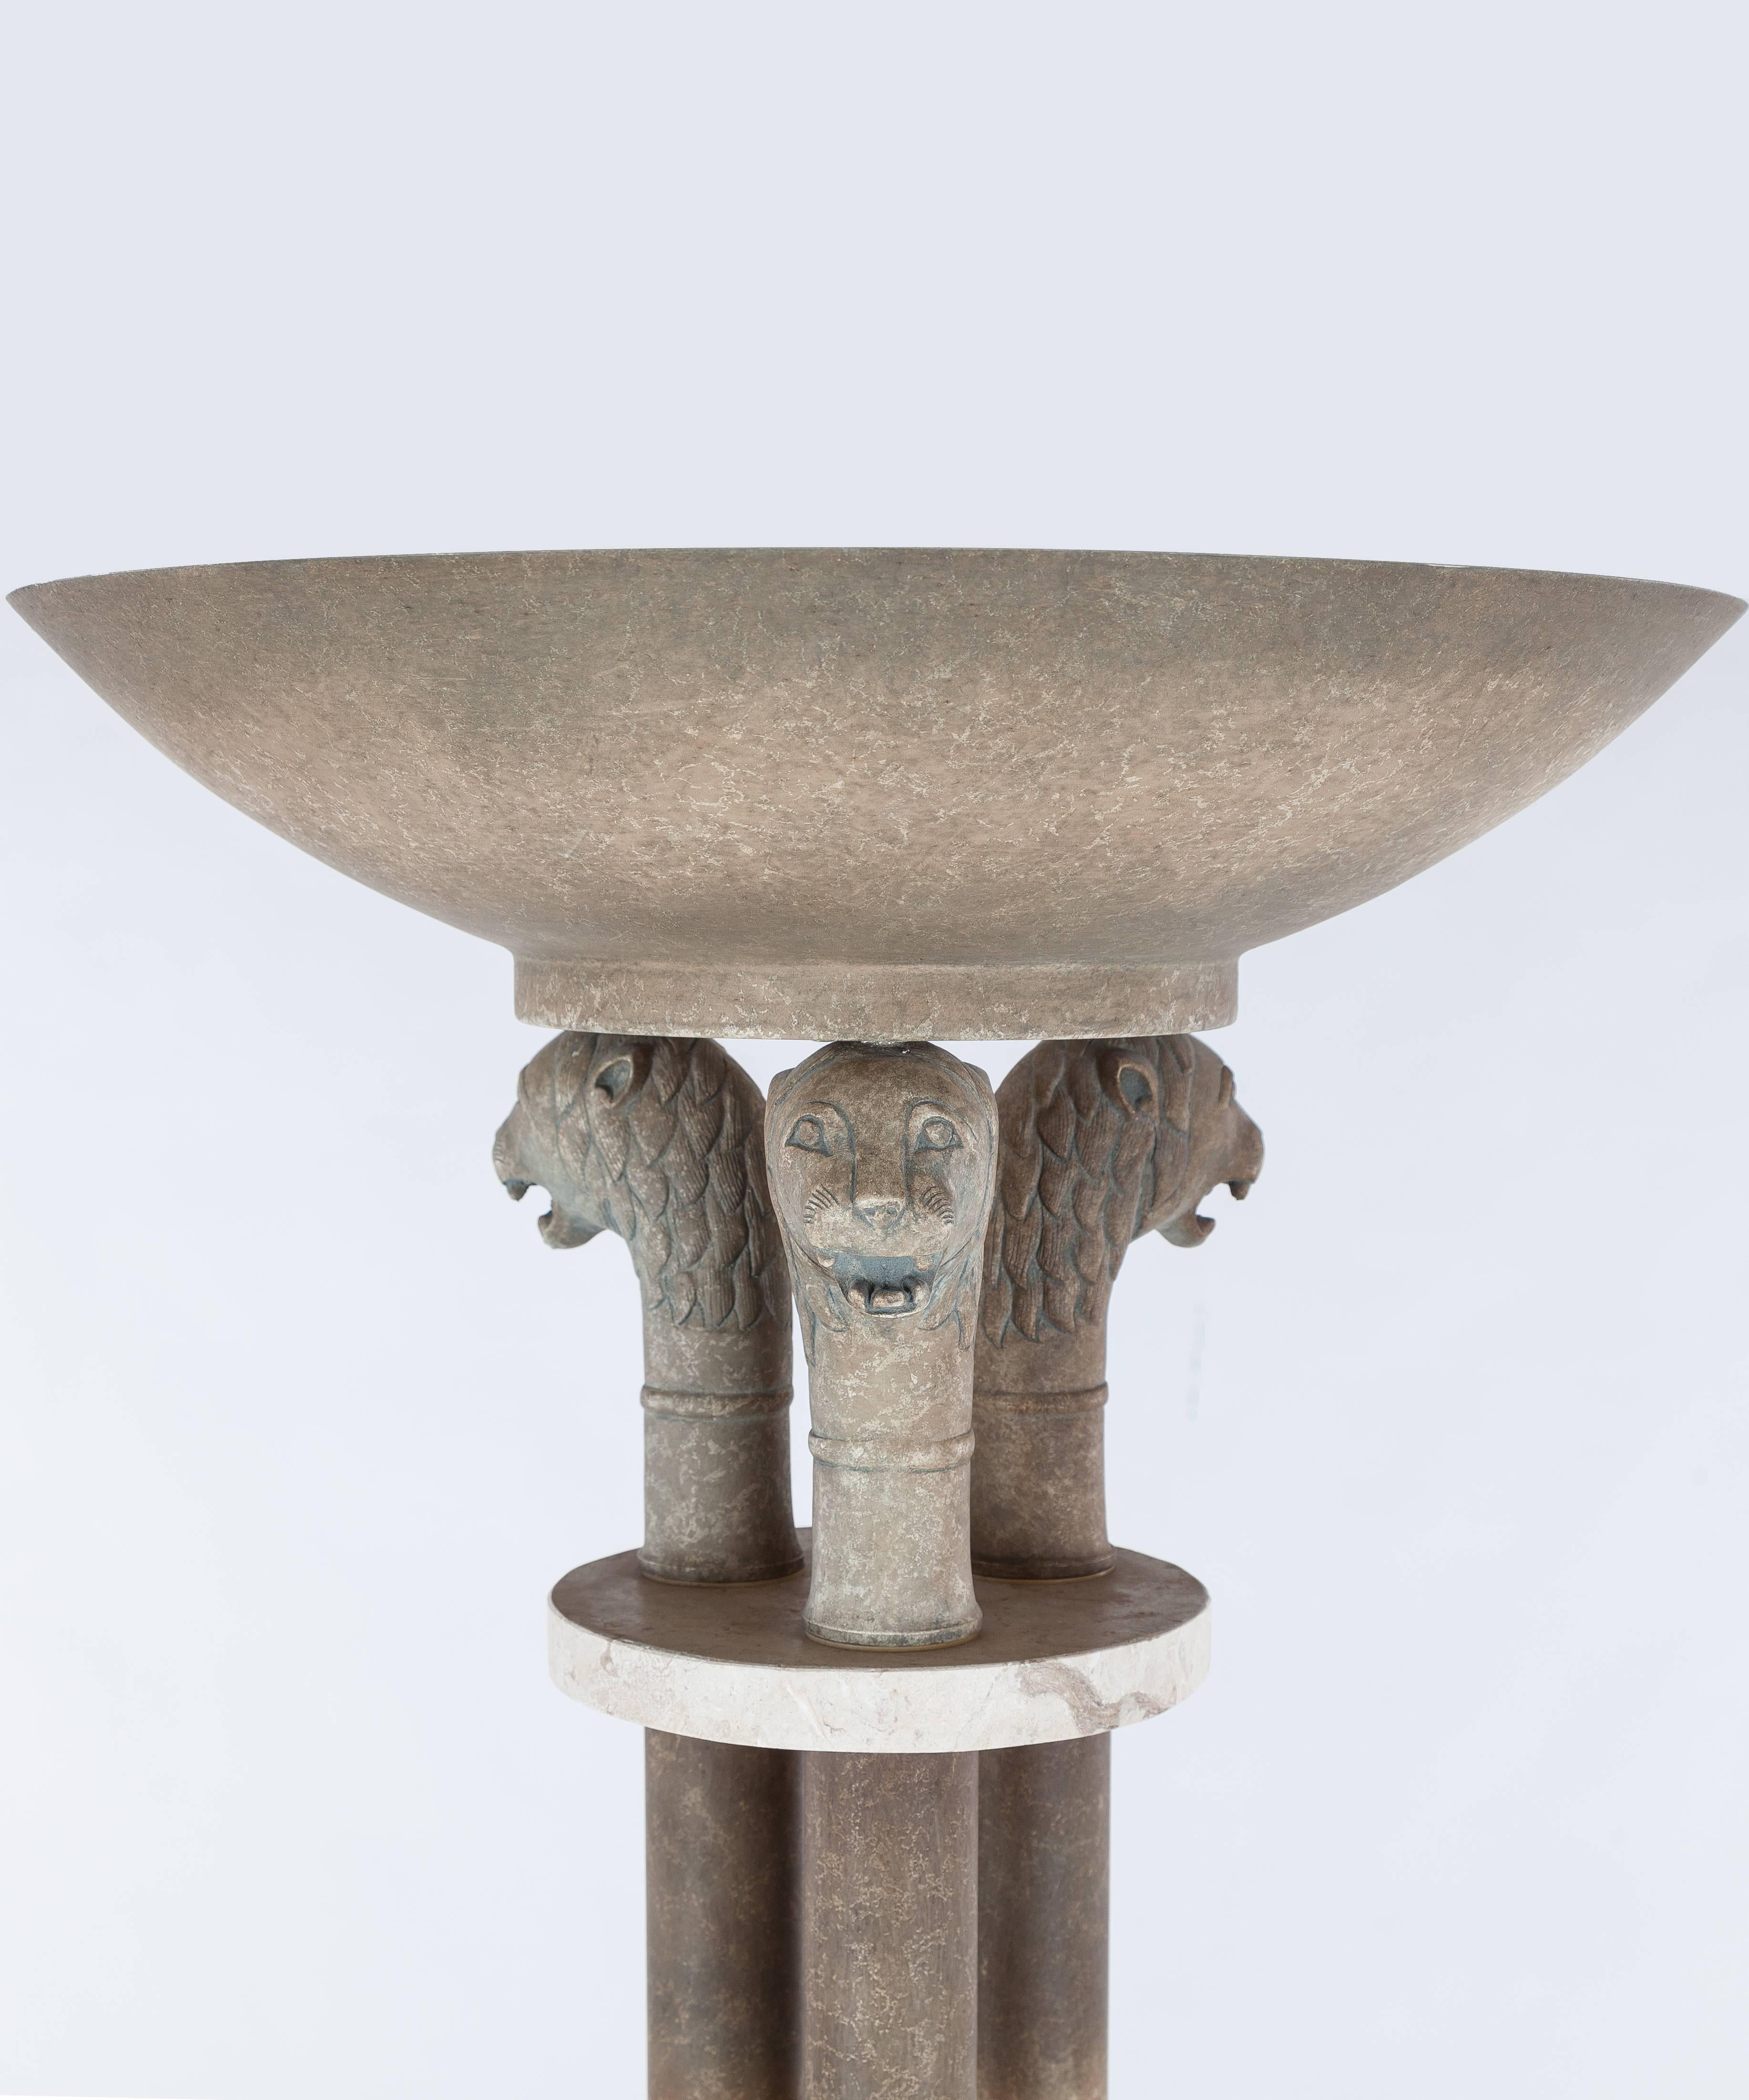 A vintage Mid-Century Modern torchiere lamp. It features a faux stone column-form with lion heads. The lamp measures approximately 20.75